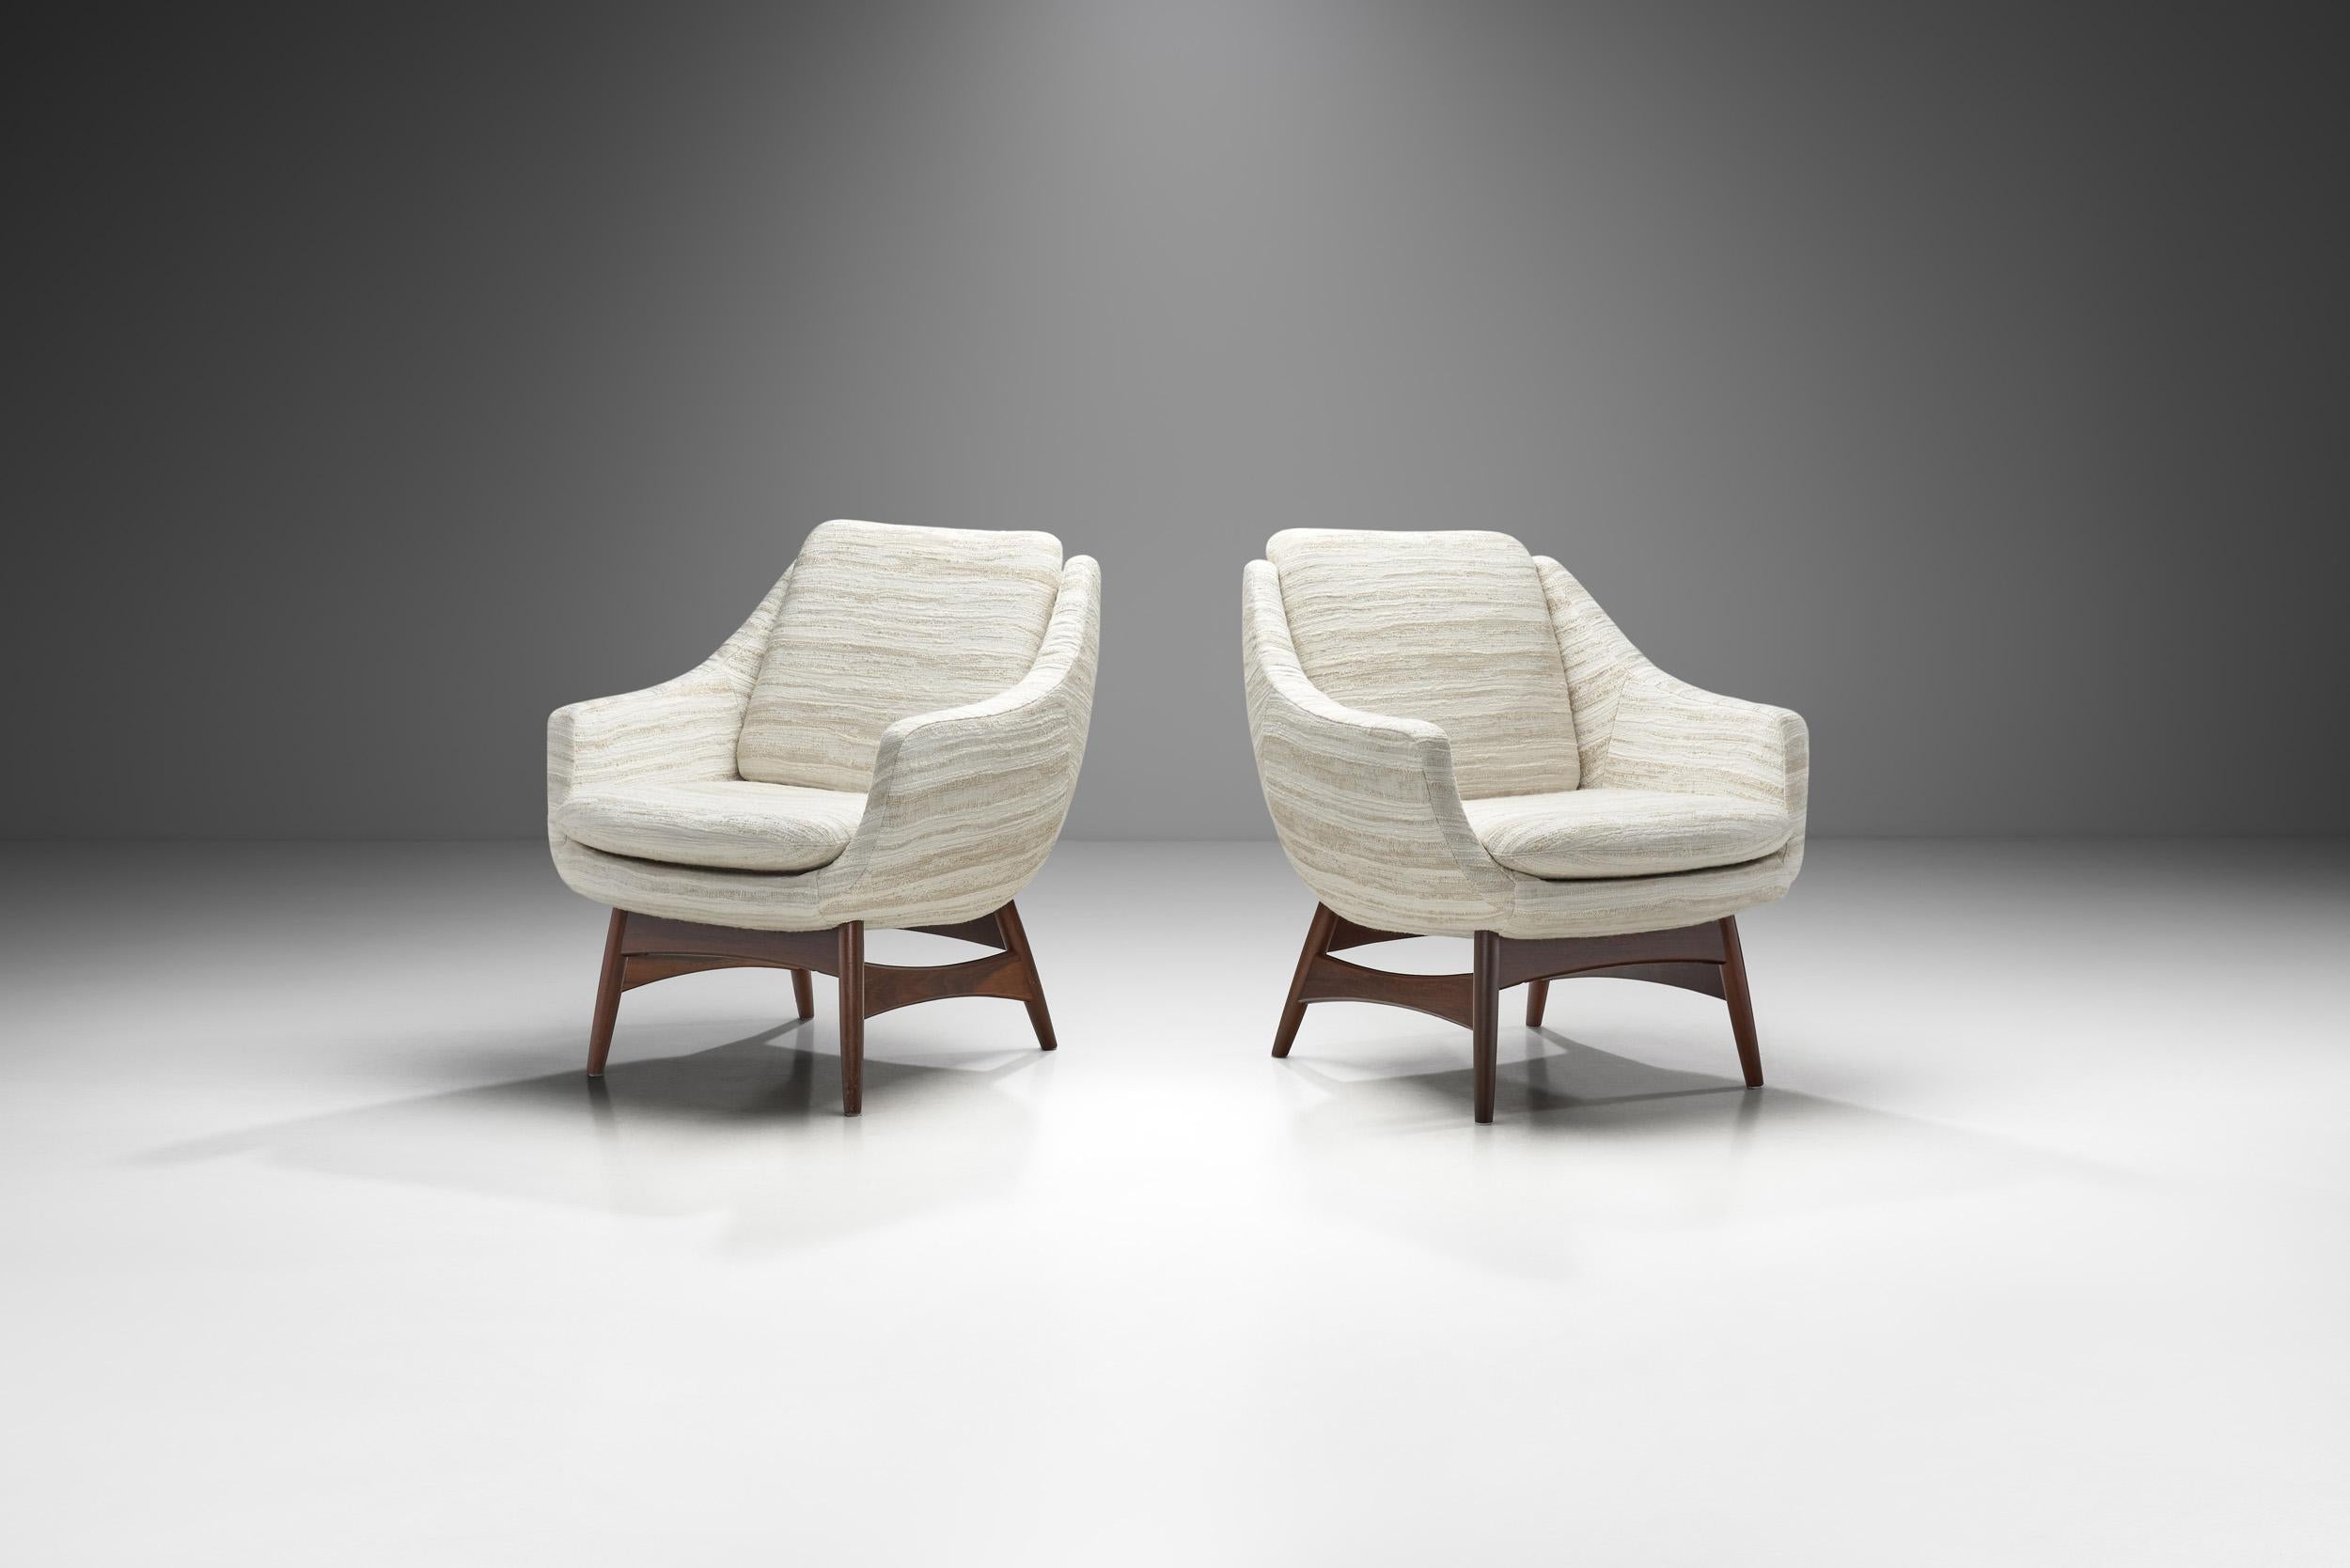 Scandinavian Modern Swedish Modern Armchairs with Structural Legs, Sweden, 1960s  For Sale